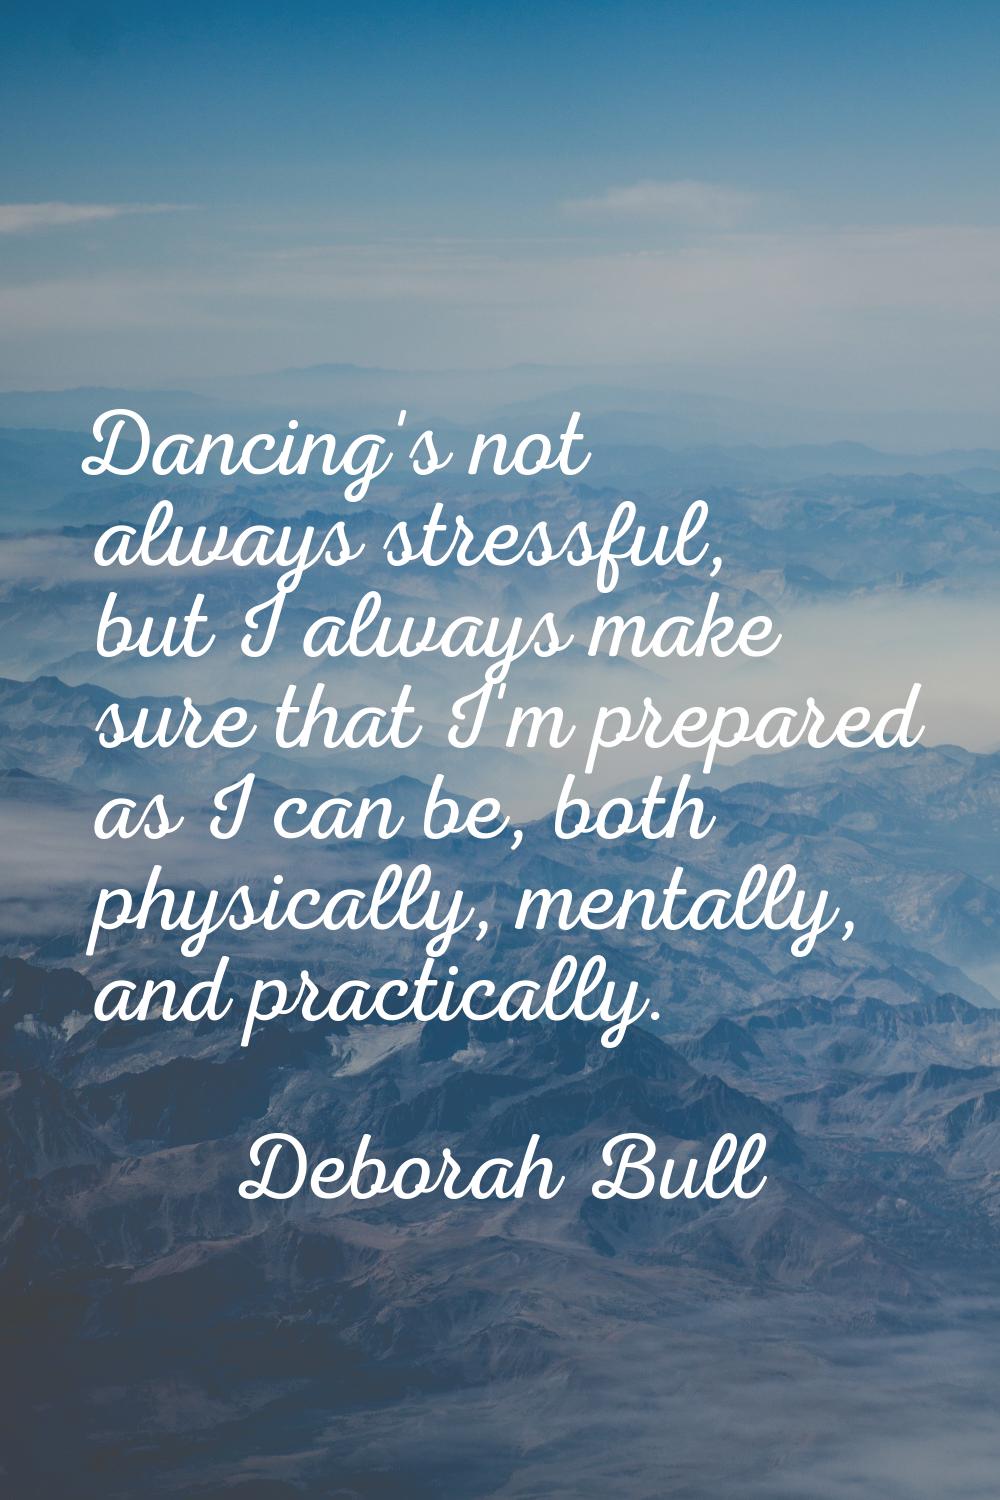 Dancing's not always stressful, but I always make sure that I'm prepared as I can be, both physical